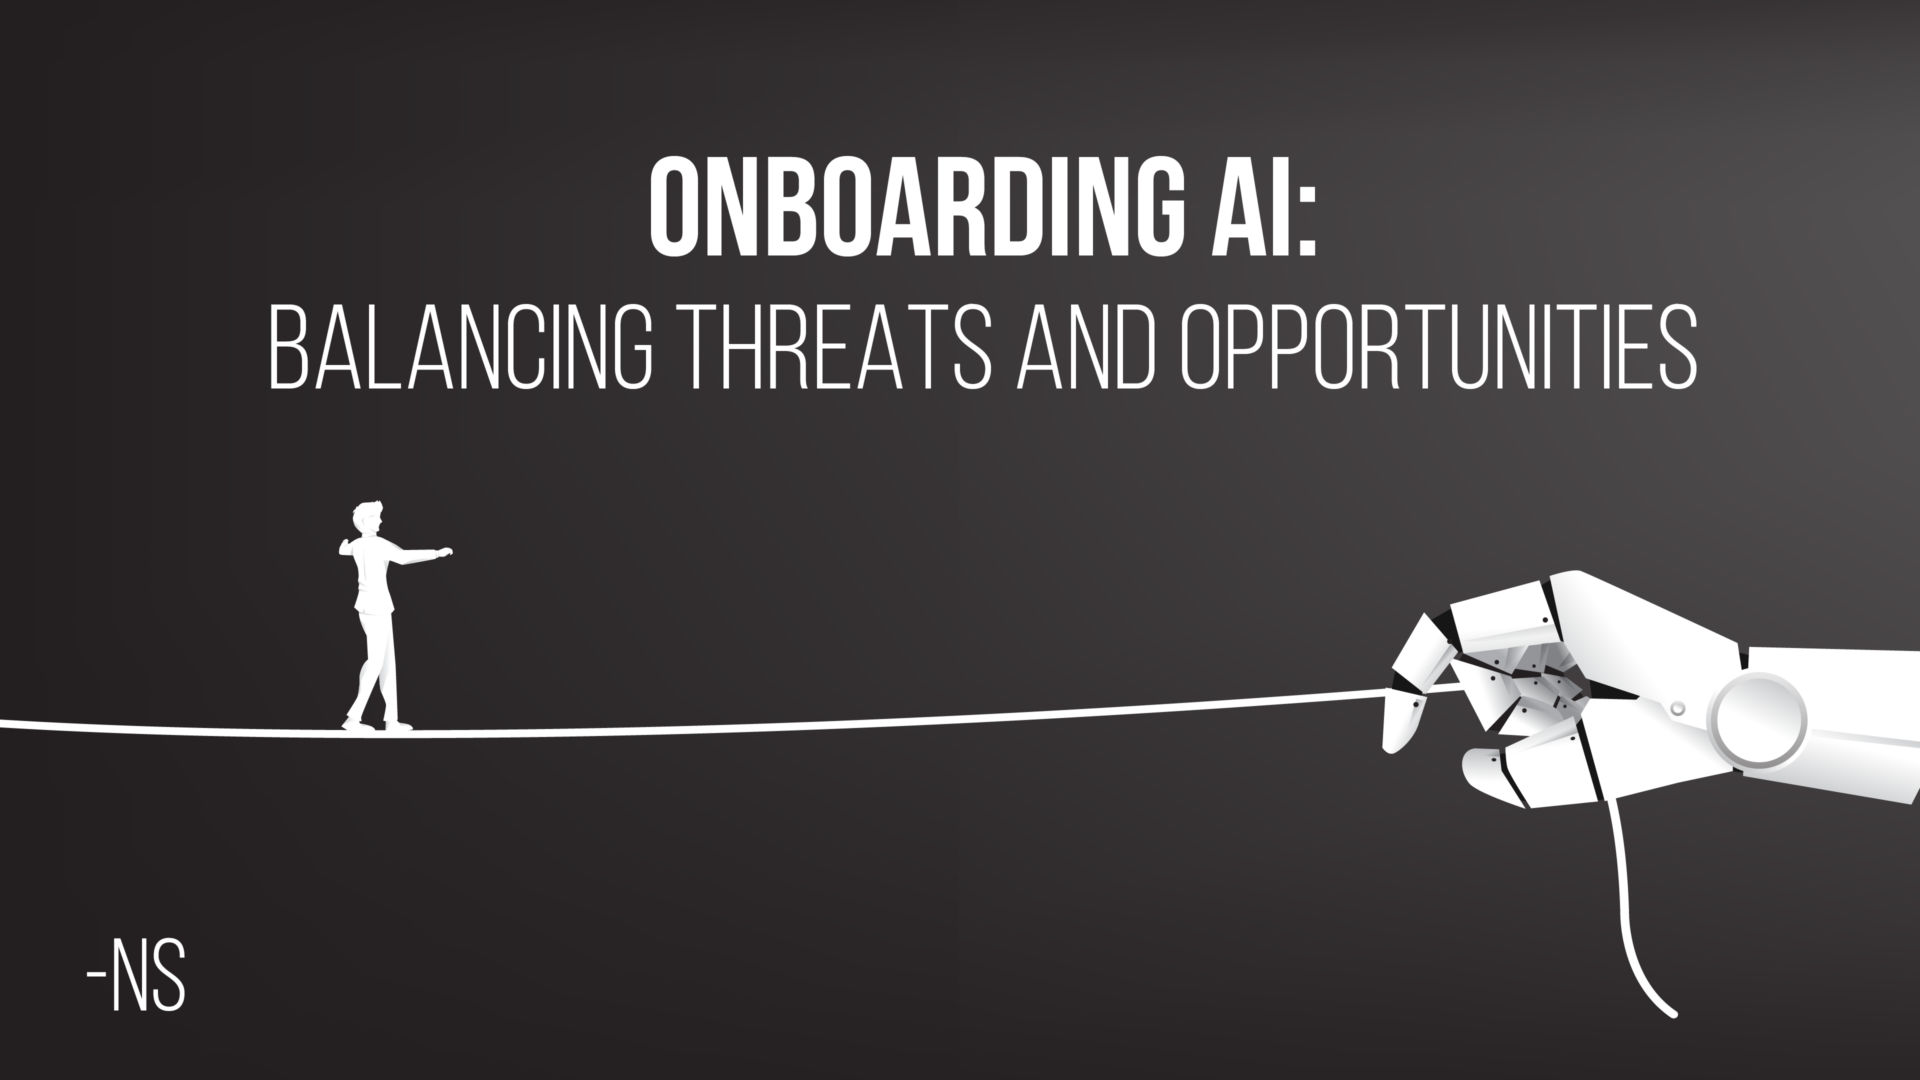 Onboarding AI: Balancing Threats and Opportunities